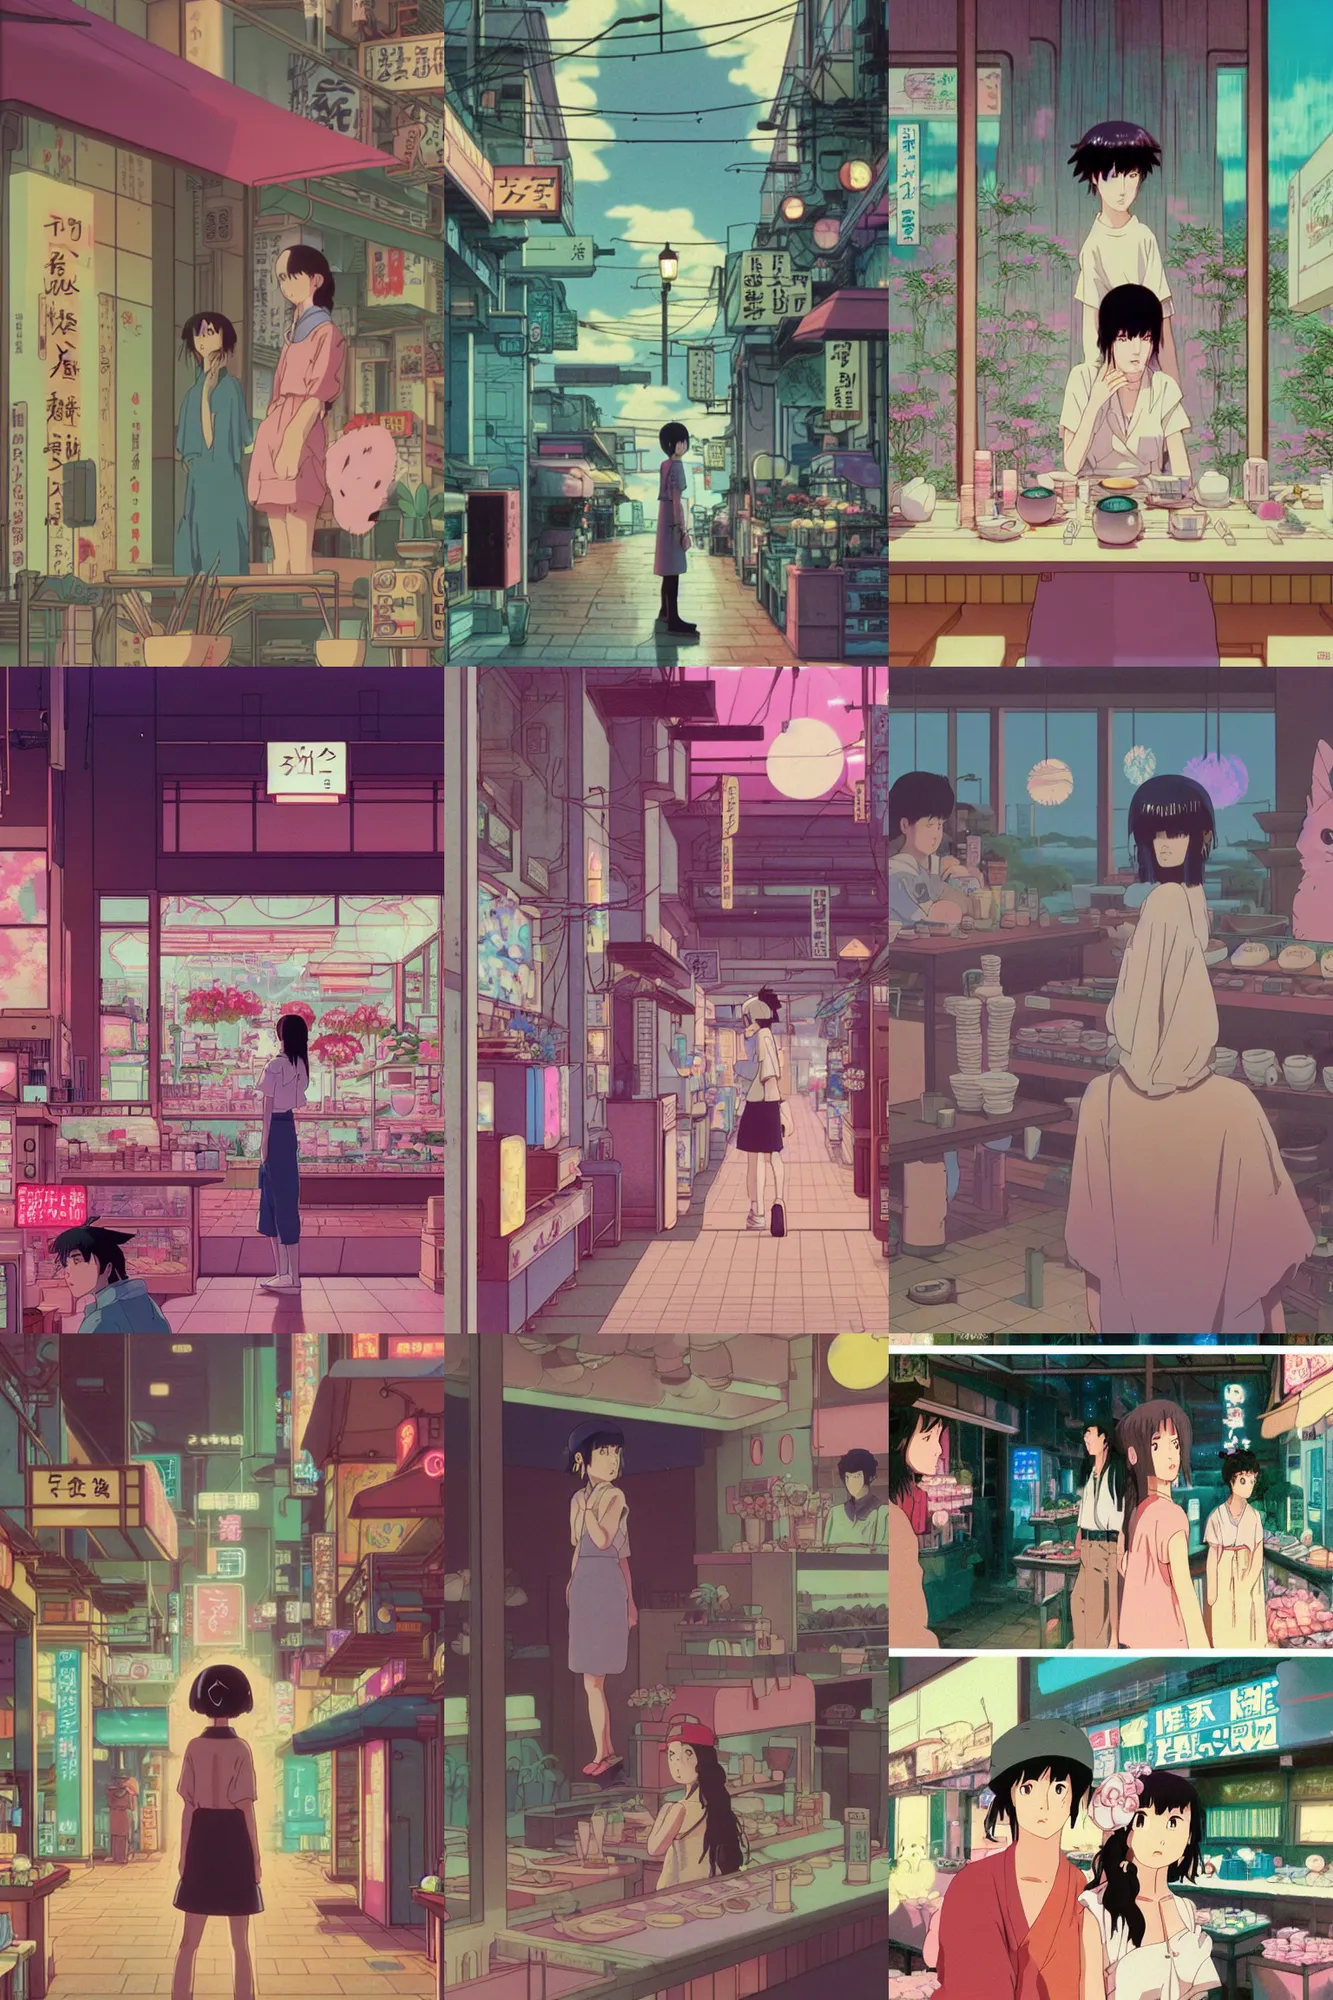 Prompt: Cinestill 50d, 8K, 35mm,J.J Abrams flare; beautiful ultra realistic vaporwave minimalistic pointé posed seinen manga Studio Ghibli mononoke at cafè(1950) film still flower shop scene, 2000s frontiers in blade runner retrofuturism fashion magazine September hyperrealism holly herndon edition, highly detailed, extreme closeup three-quarter pointé posed model portrait, tilt shift zaha hadid background, three point perspective: focus on anti-g flight suit;pointé pose;open mouth,terrified, eye contact, soft lighting